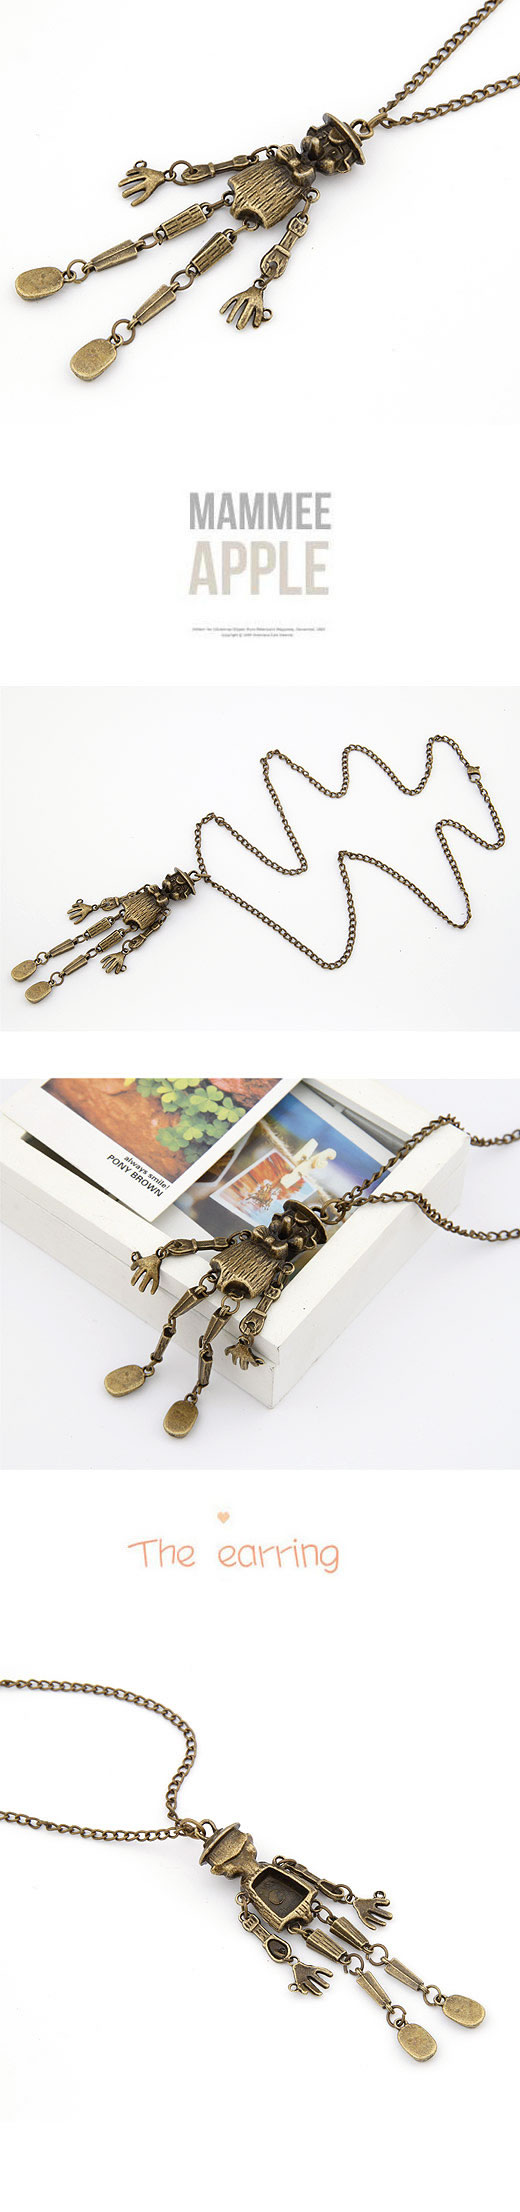 Foldable Bronze Scarecrow Design Alloy Chains,Chains